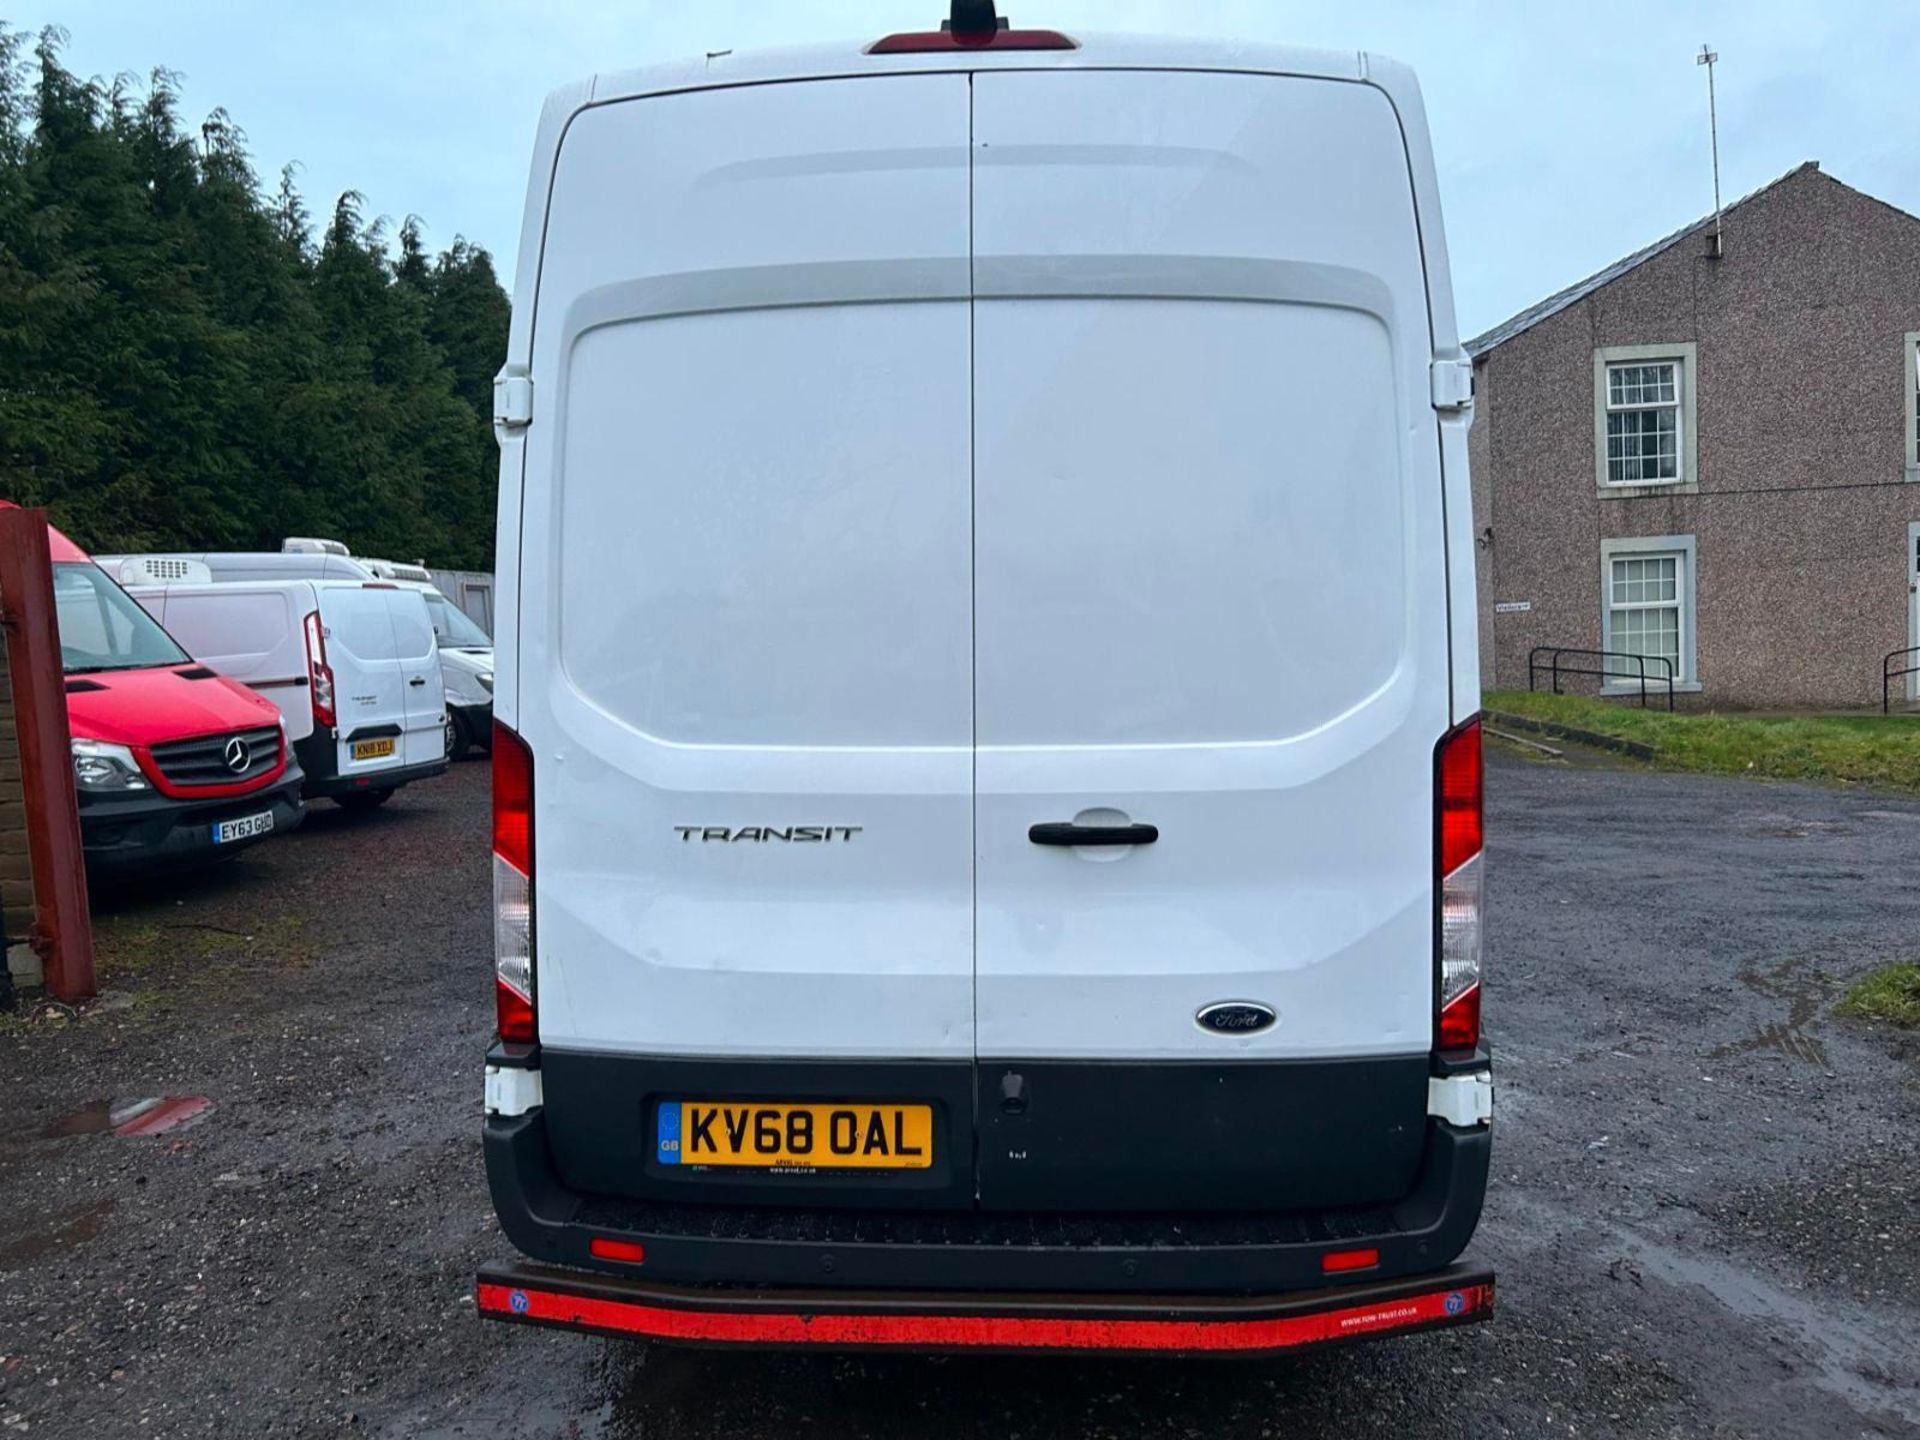 >>>SPECIAL CLEARANCE<<< 2018 FORD TRANSIT 2.0 TDCI 130PS L3 H3 PANEL VAN - Image 11 of 13